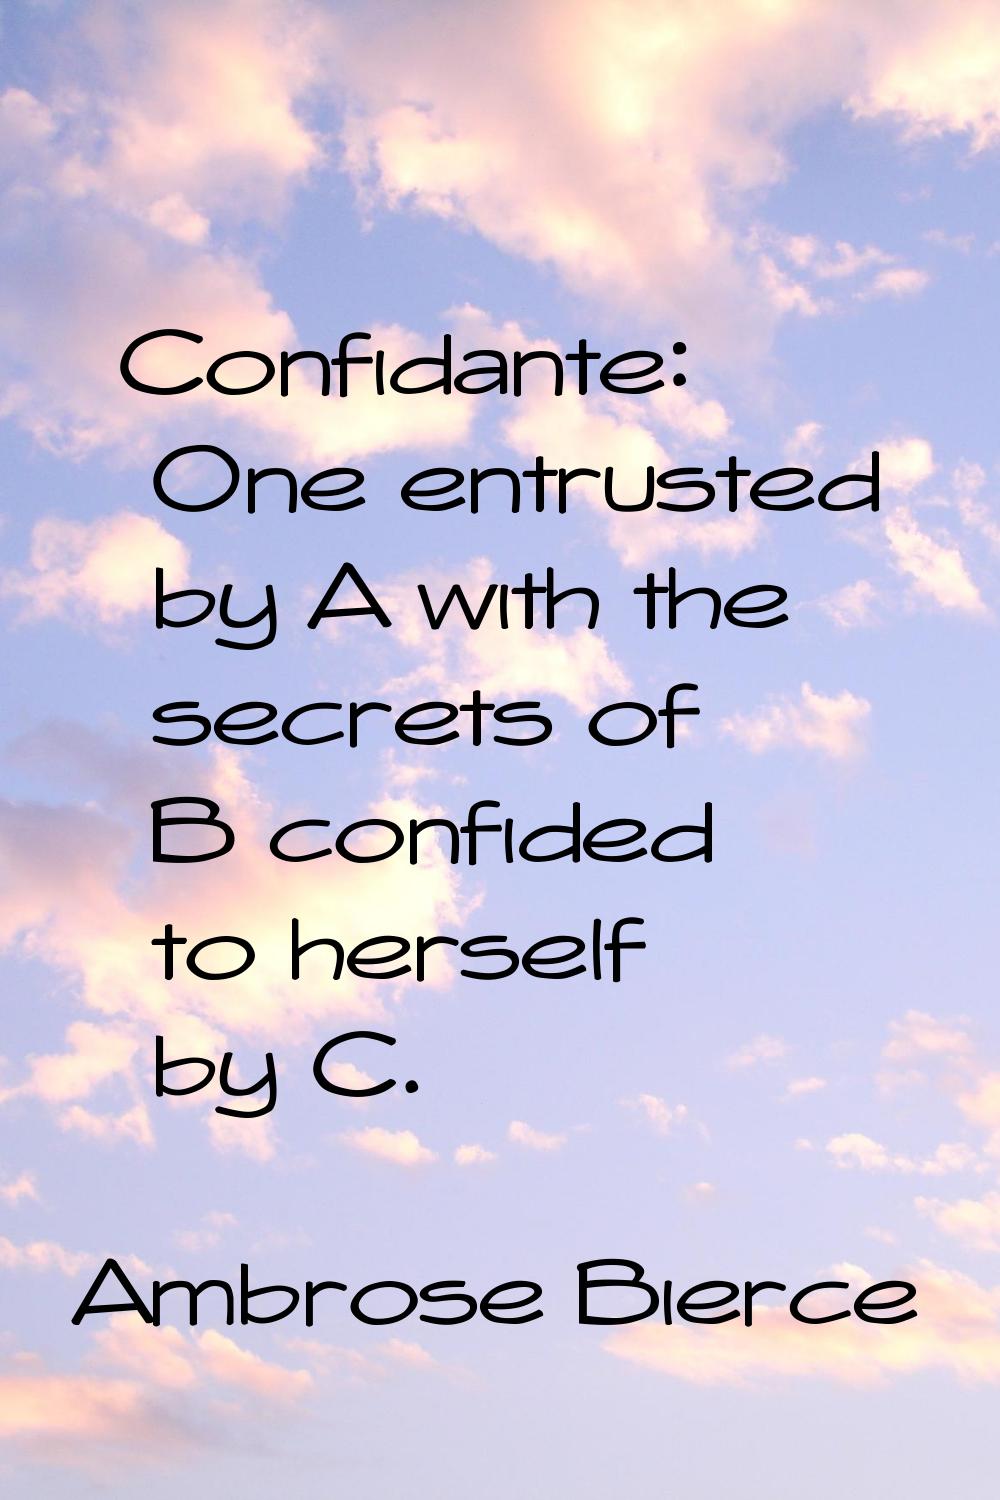 Confidante: One entrusted by A with the secrets of B confided to herself by C.